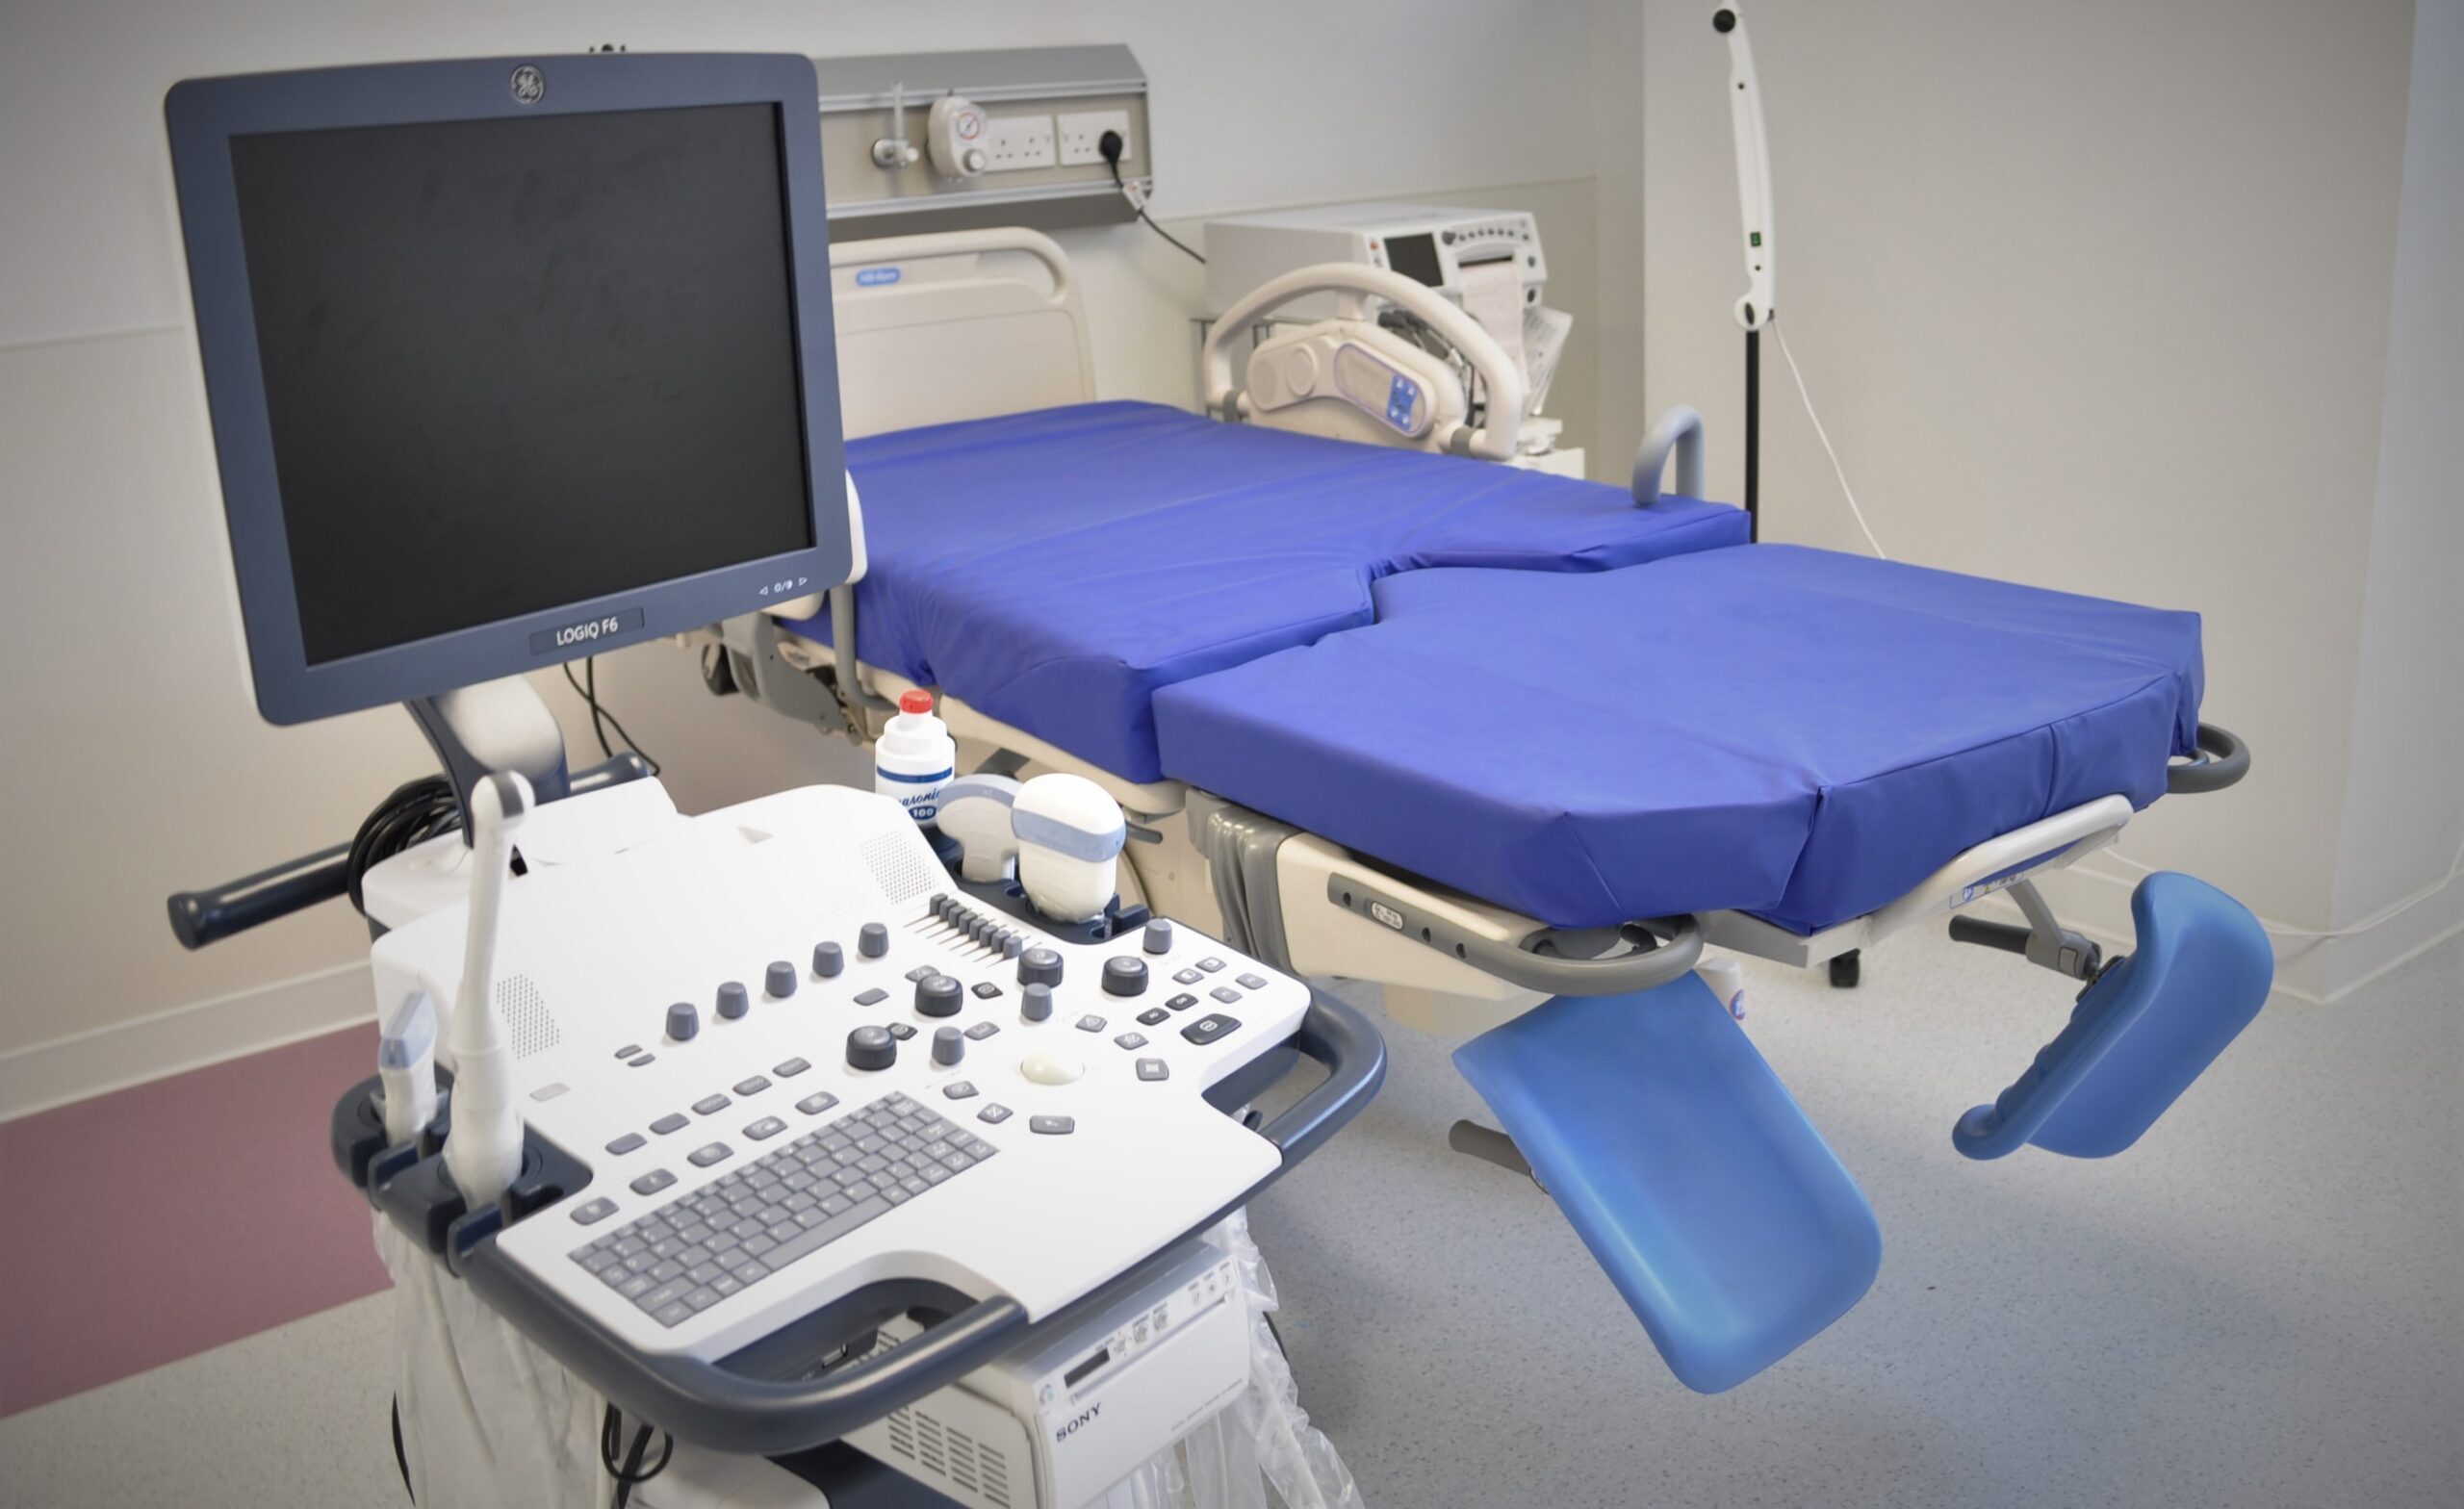 Remote and Predictive Medical Equipment Maintenance Market Research Report